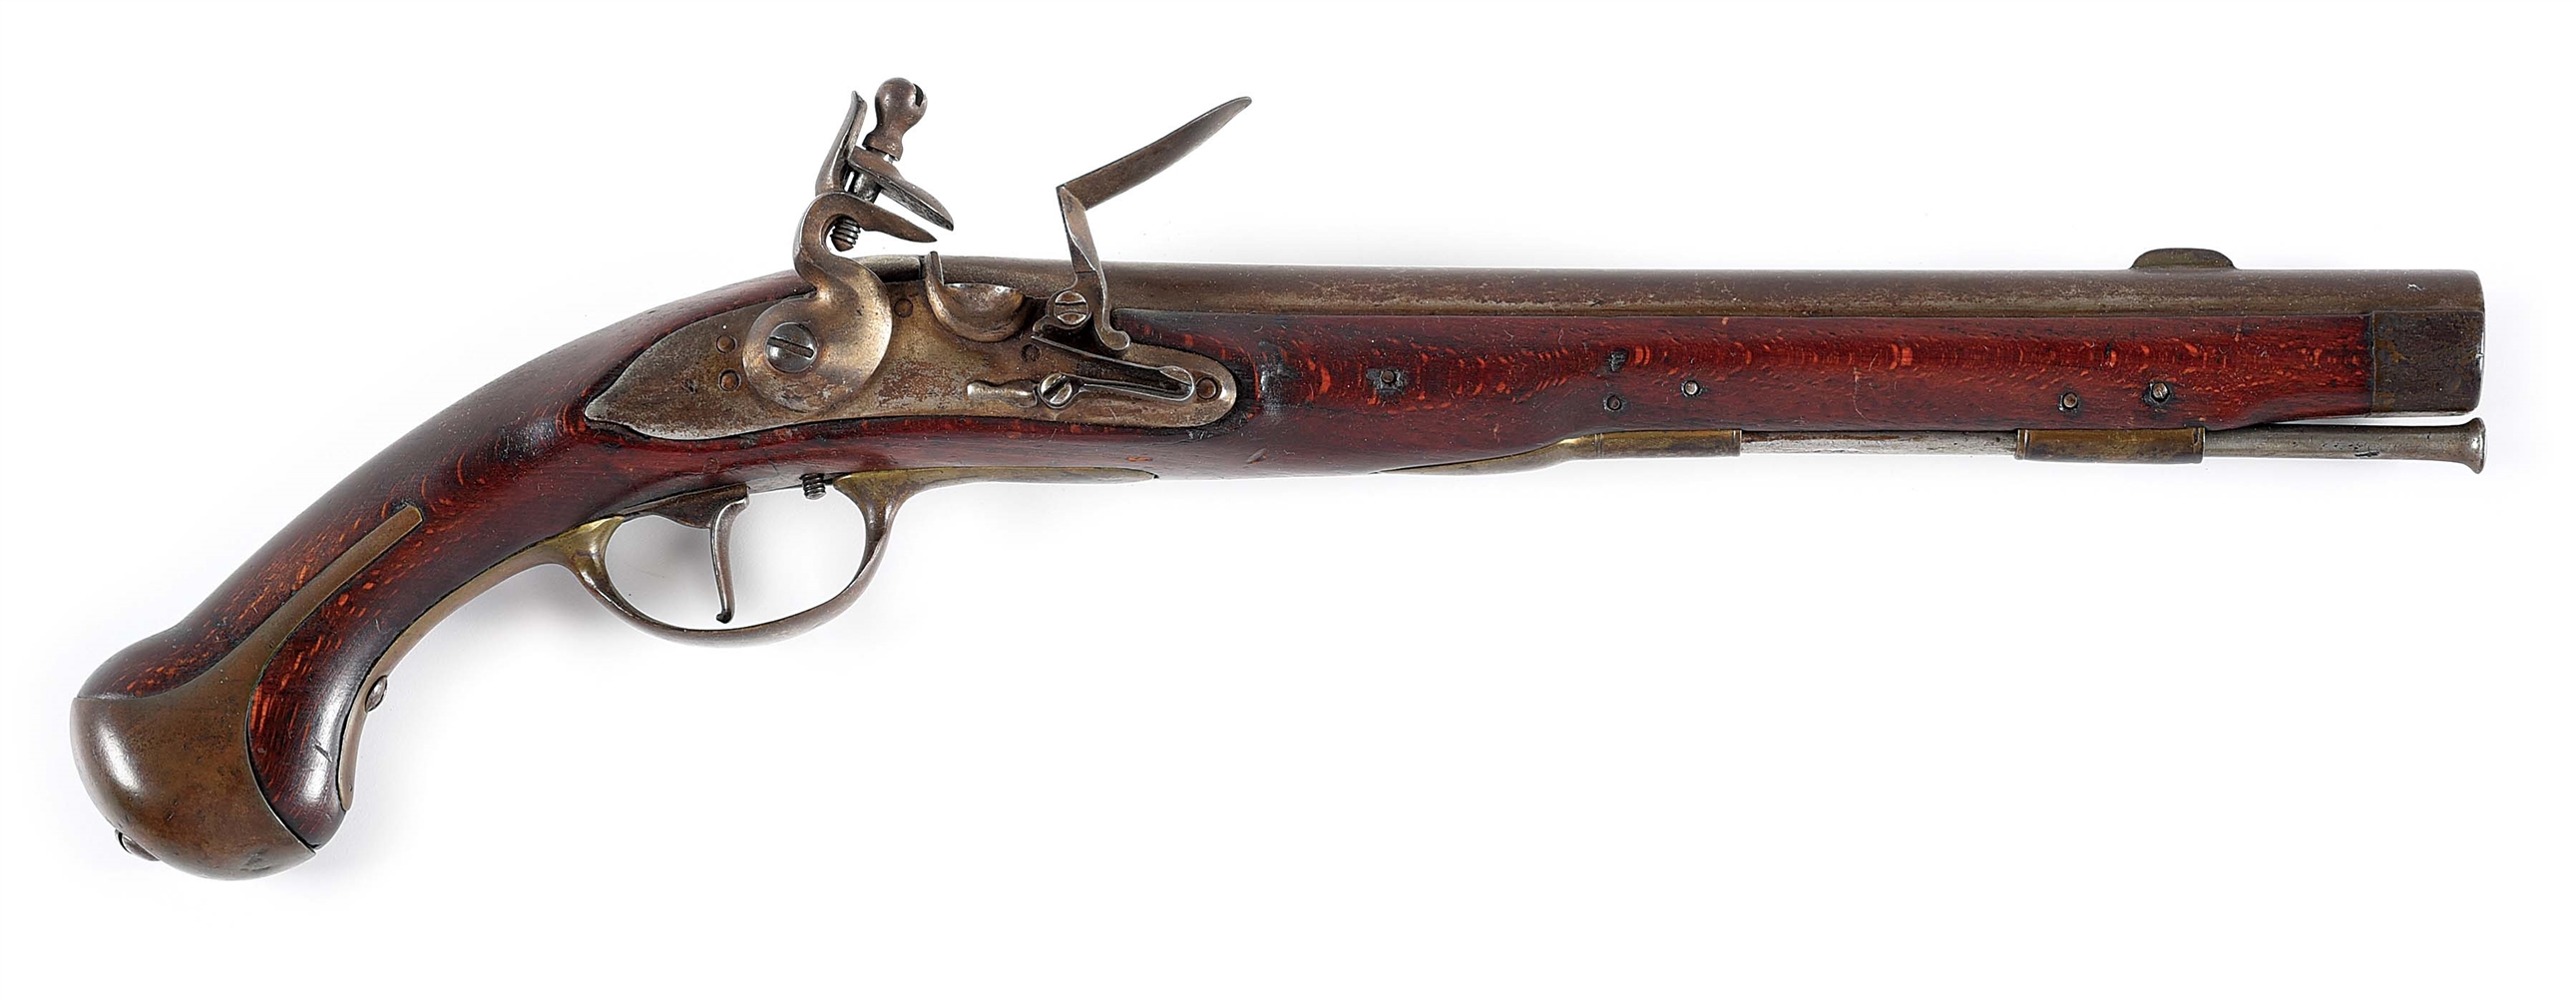 (A) LARGE PERIOD FLINTLOCK PISTOL WITH "NH" ON TANG.